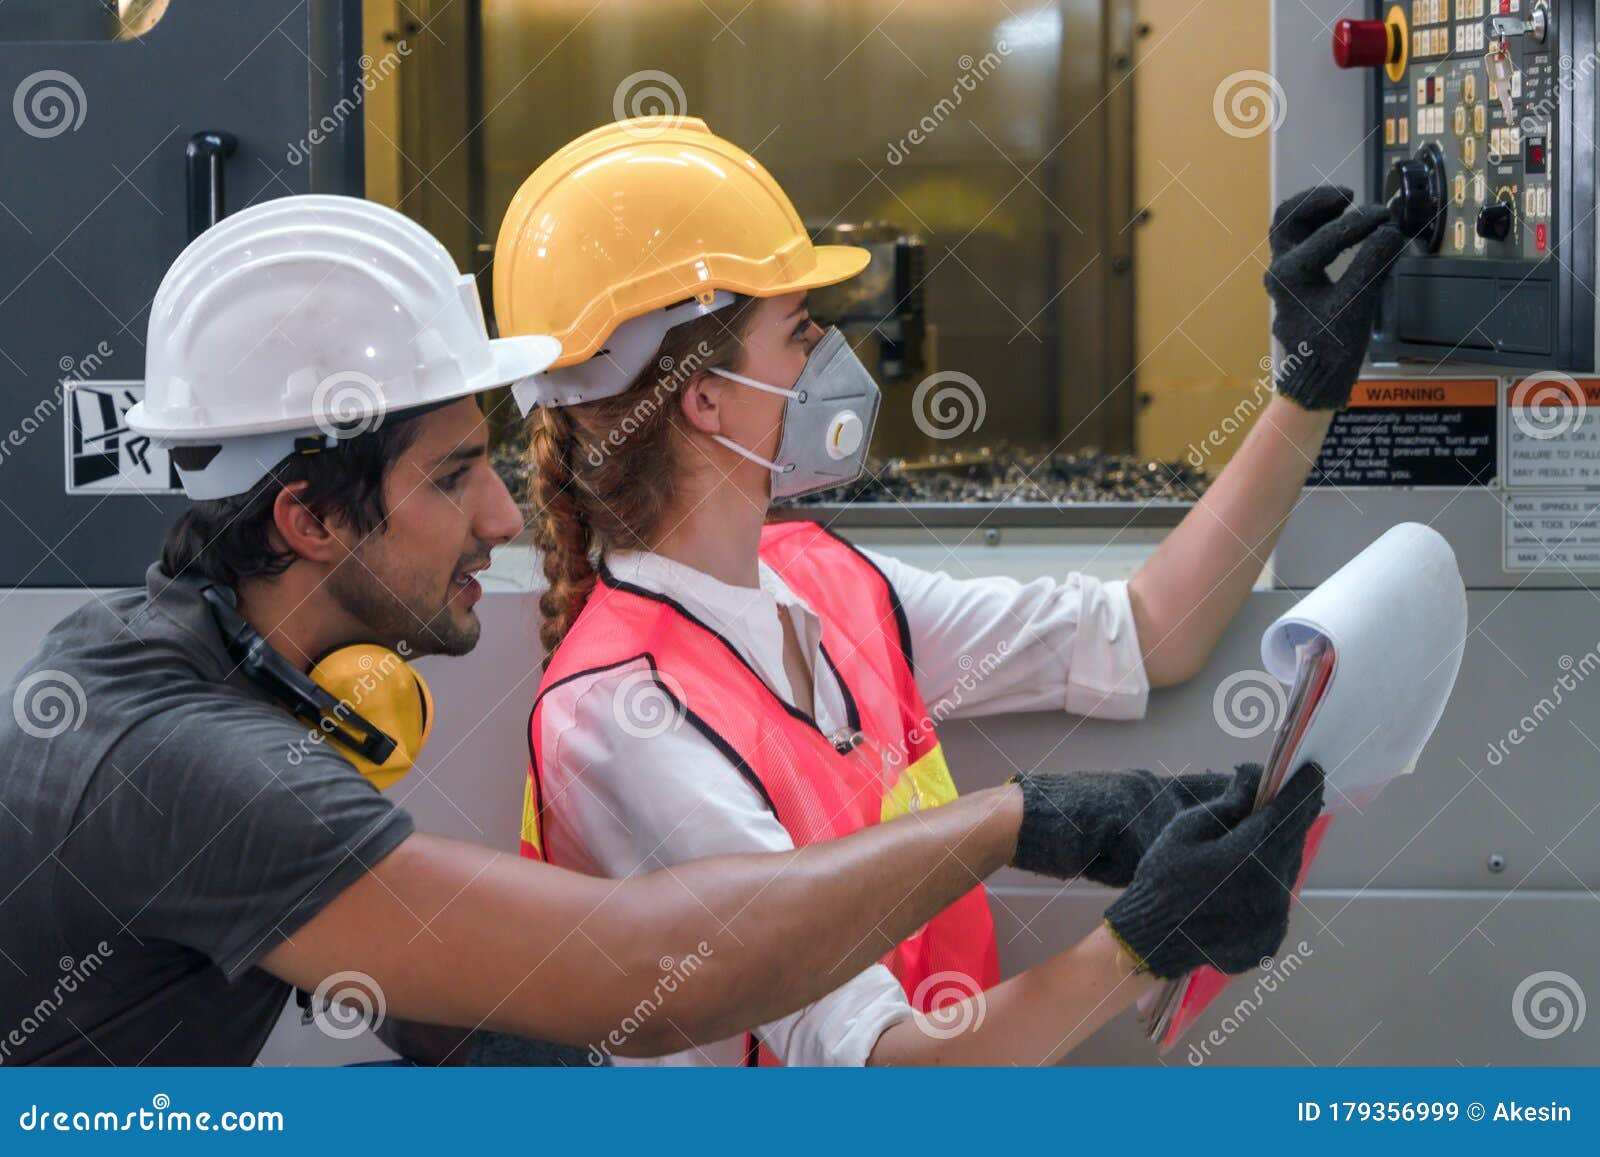 industrial or factory engineering worker and supervisor setting up computerized control panel of factory assembly line controller